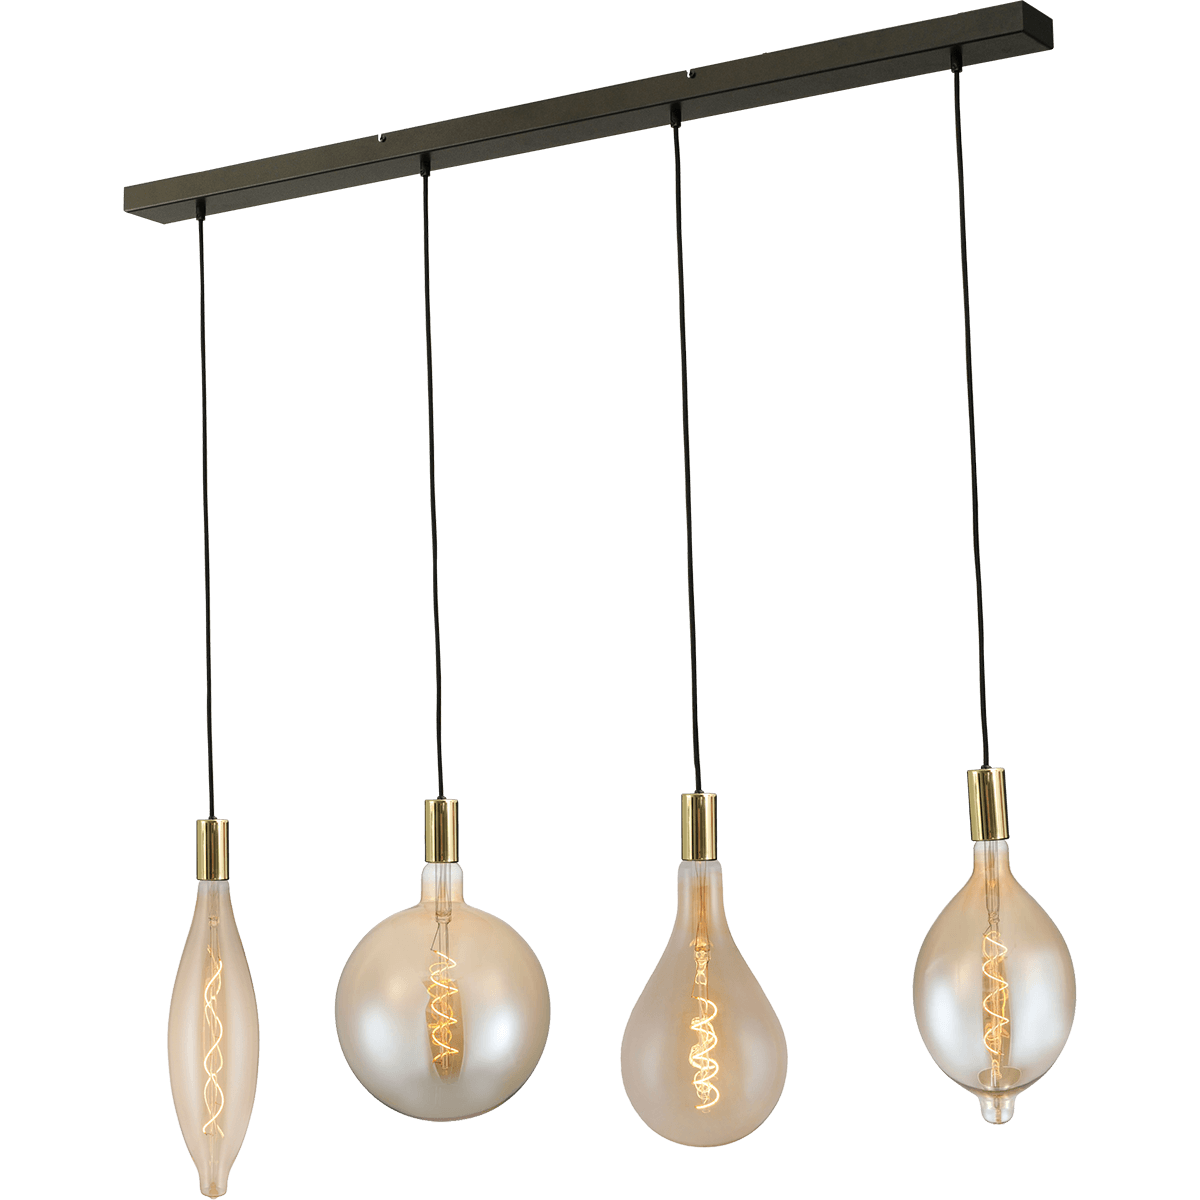 Hanglamp Tessi 4-lichts glimmend messing 130x8cm